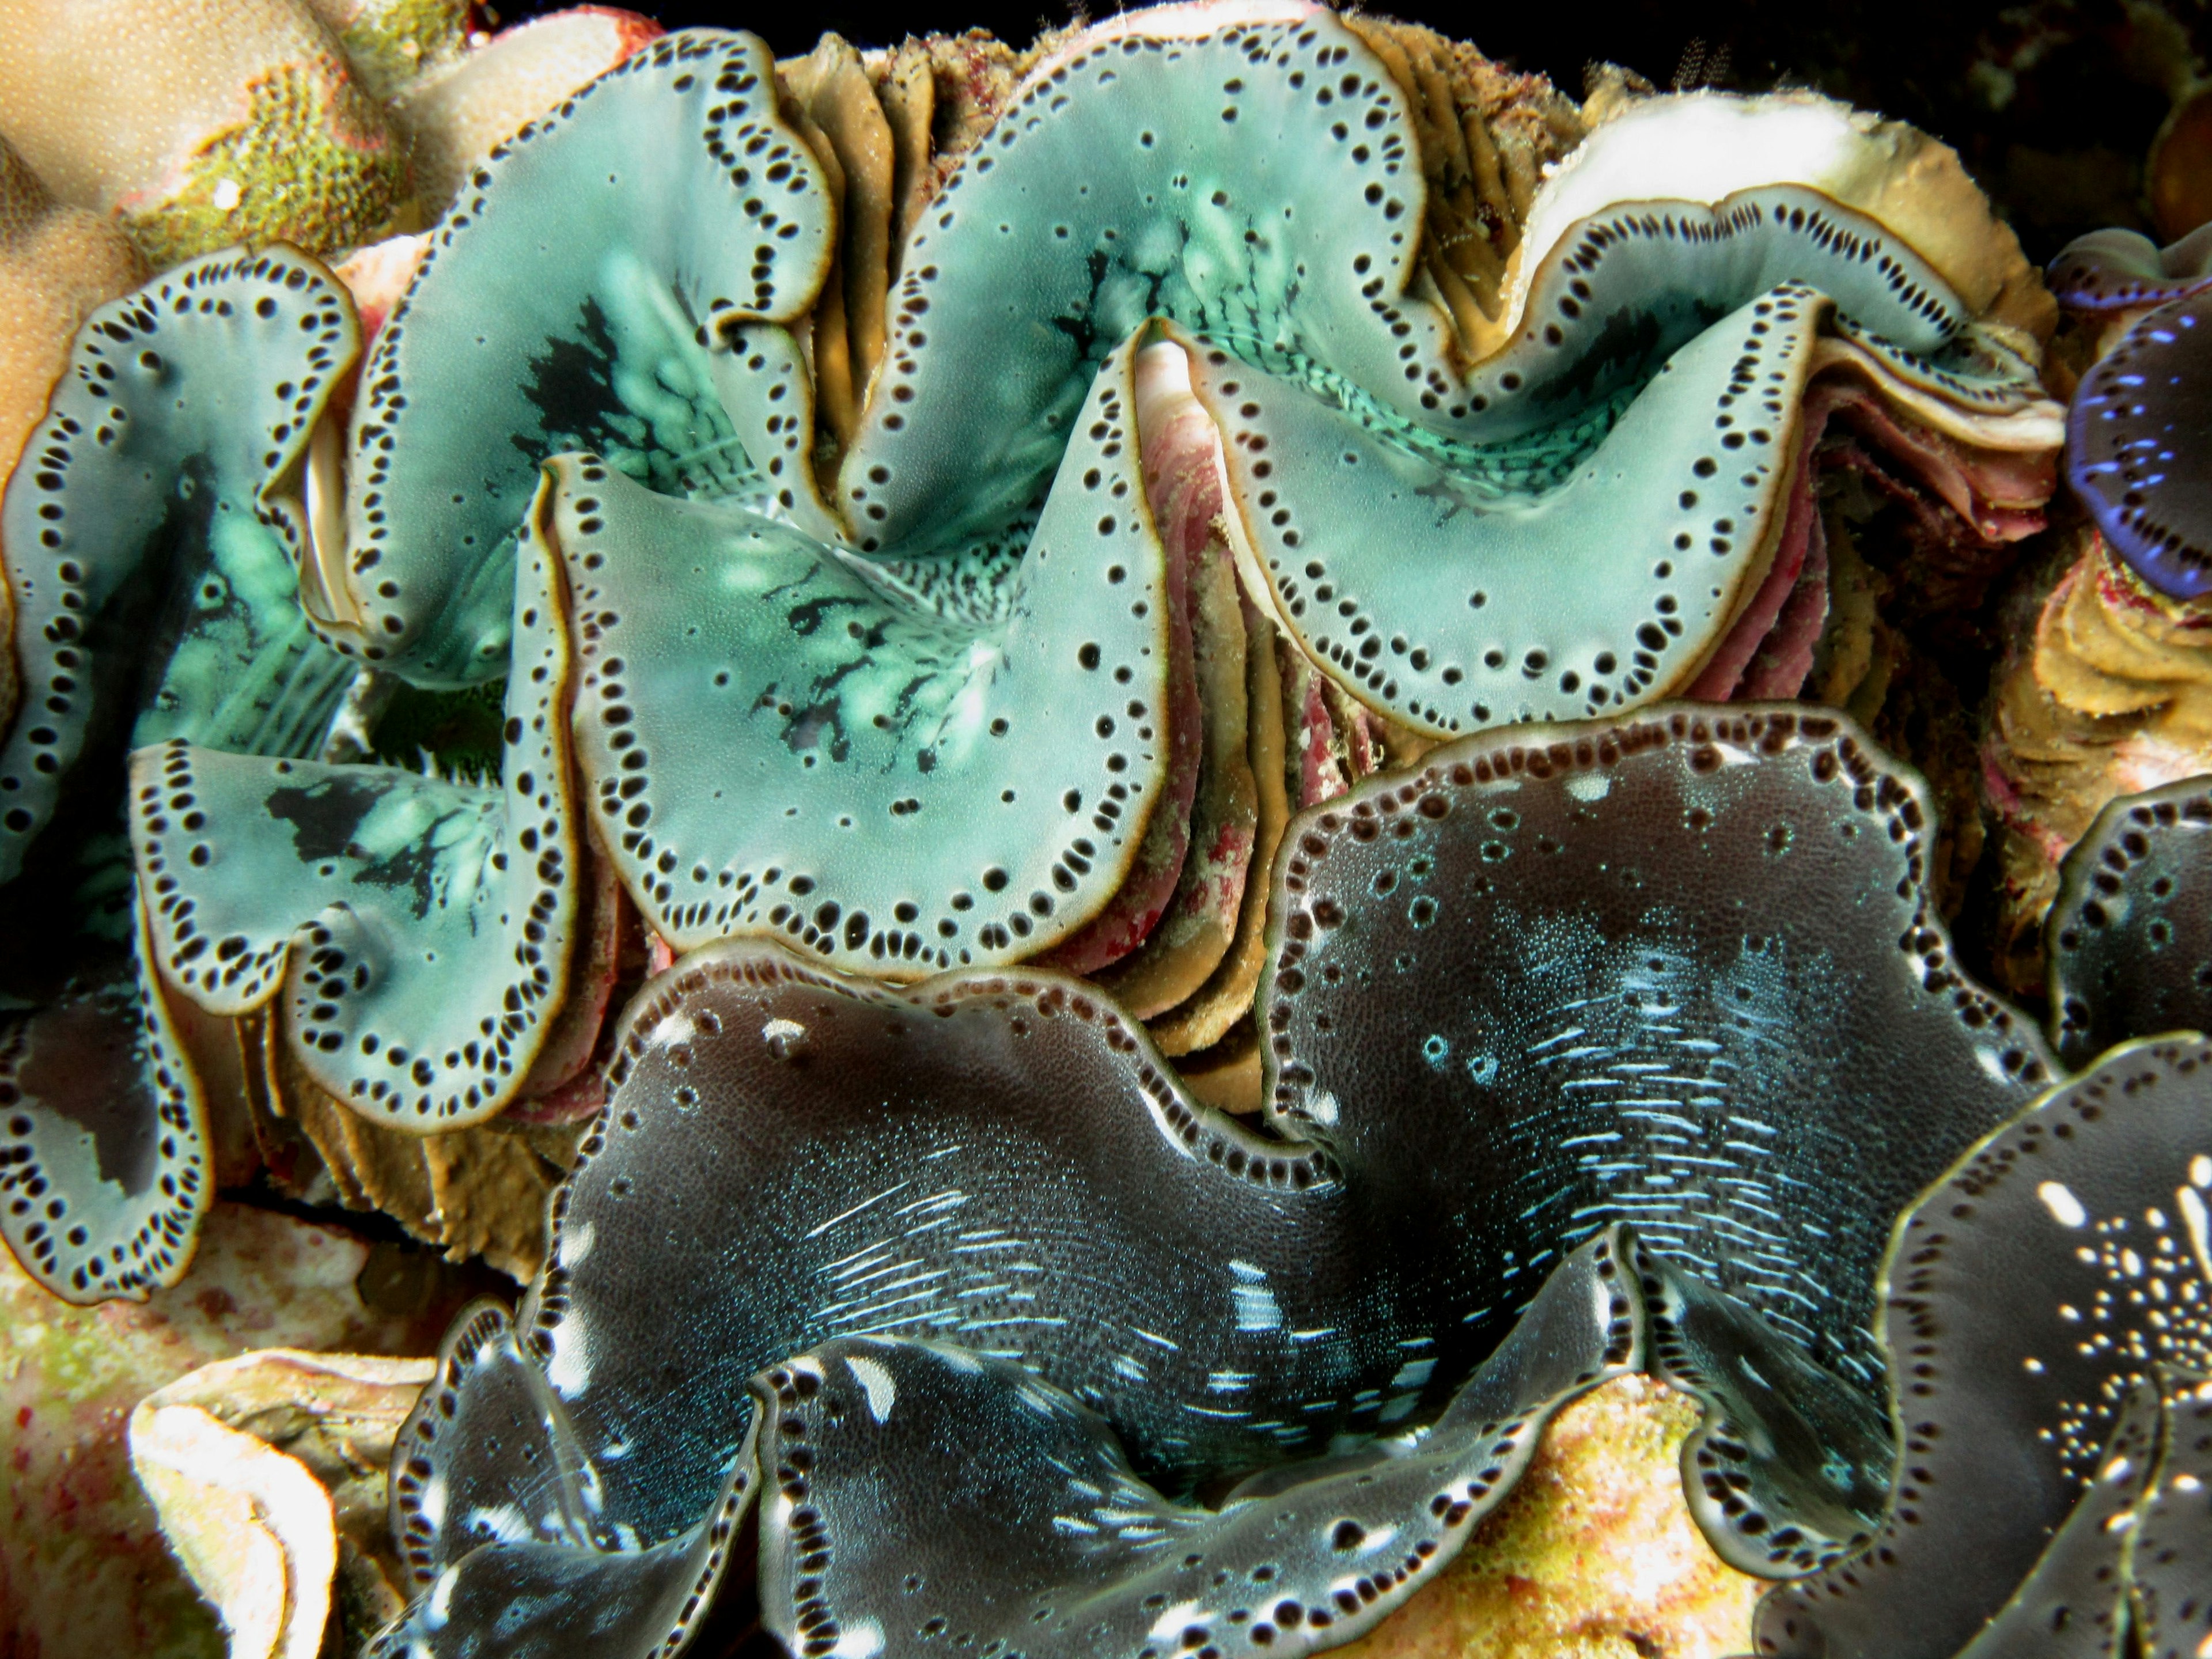 close up of turquoise and black giant clams